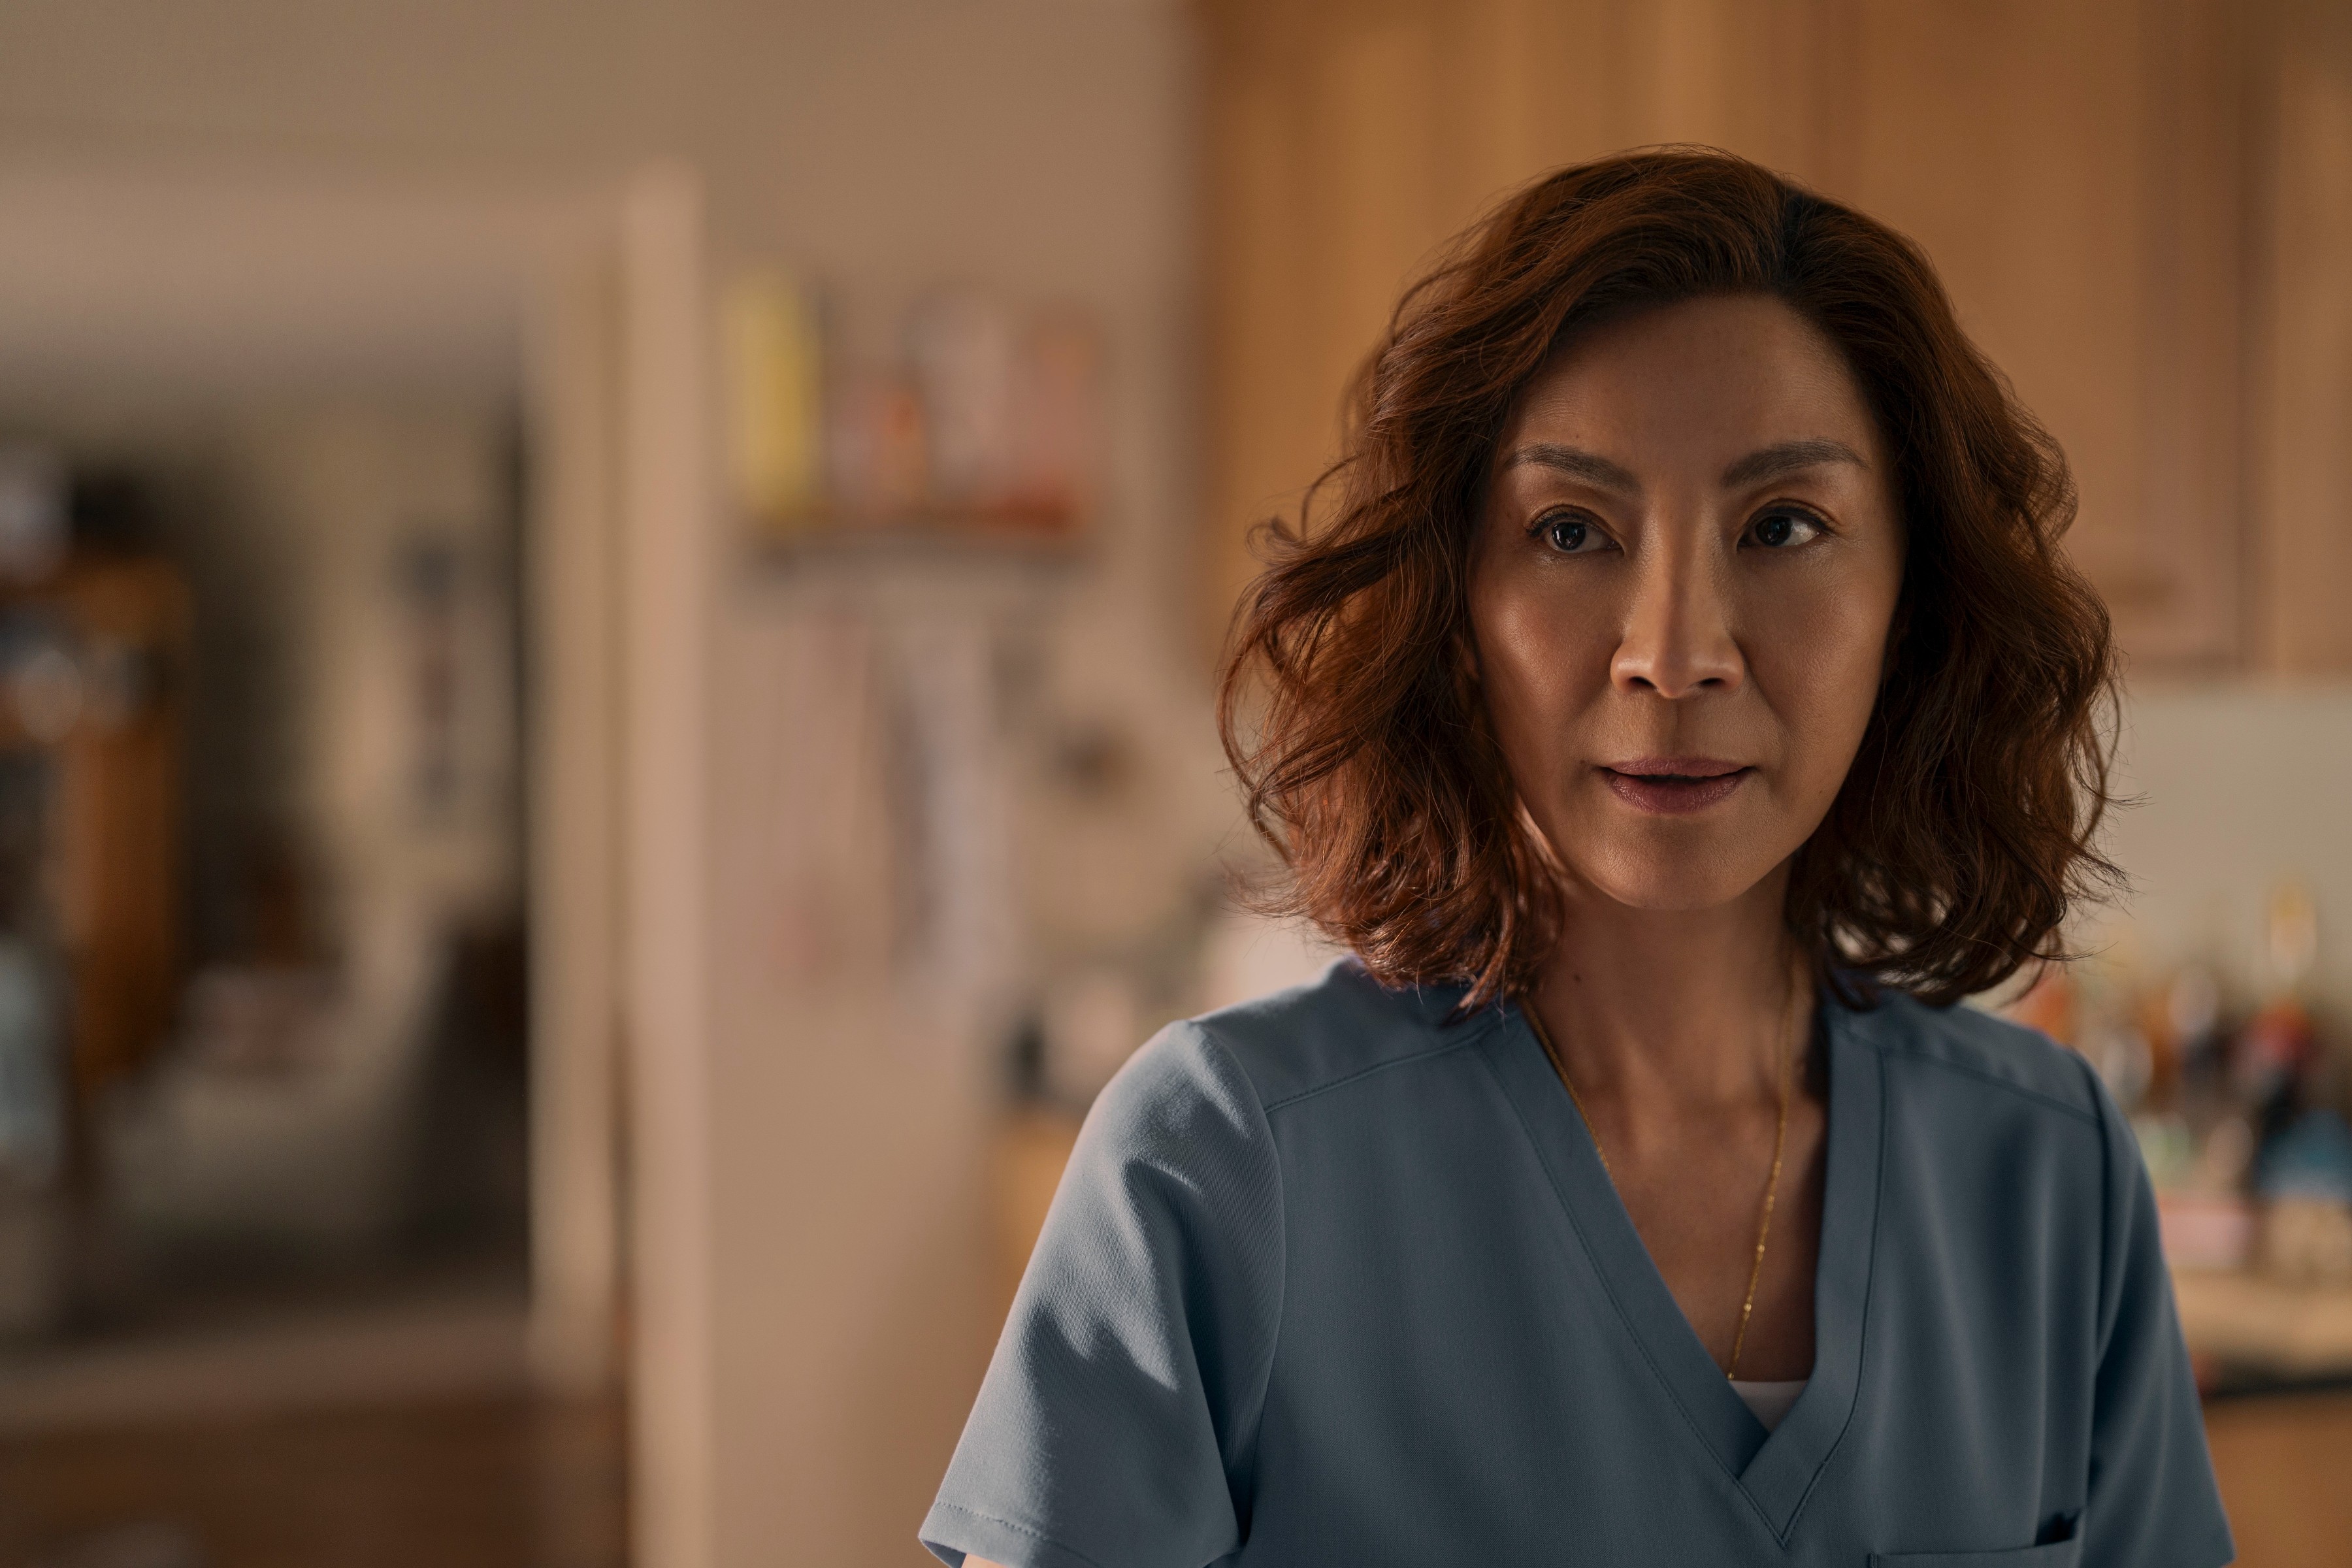 Michelle Yeoh as Mama Sun in a still from “The Brothers Sun”. Photo: Michael Desmond/ Netflix